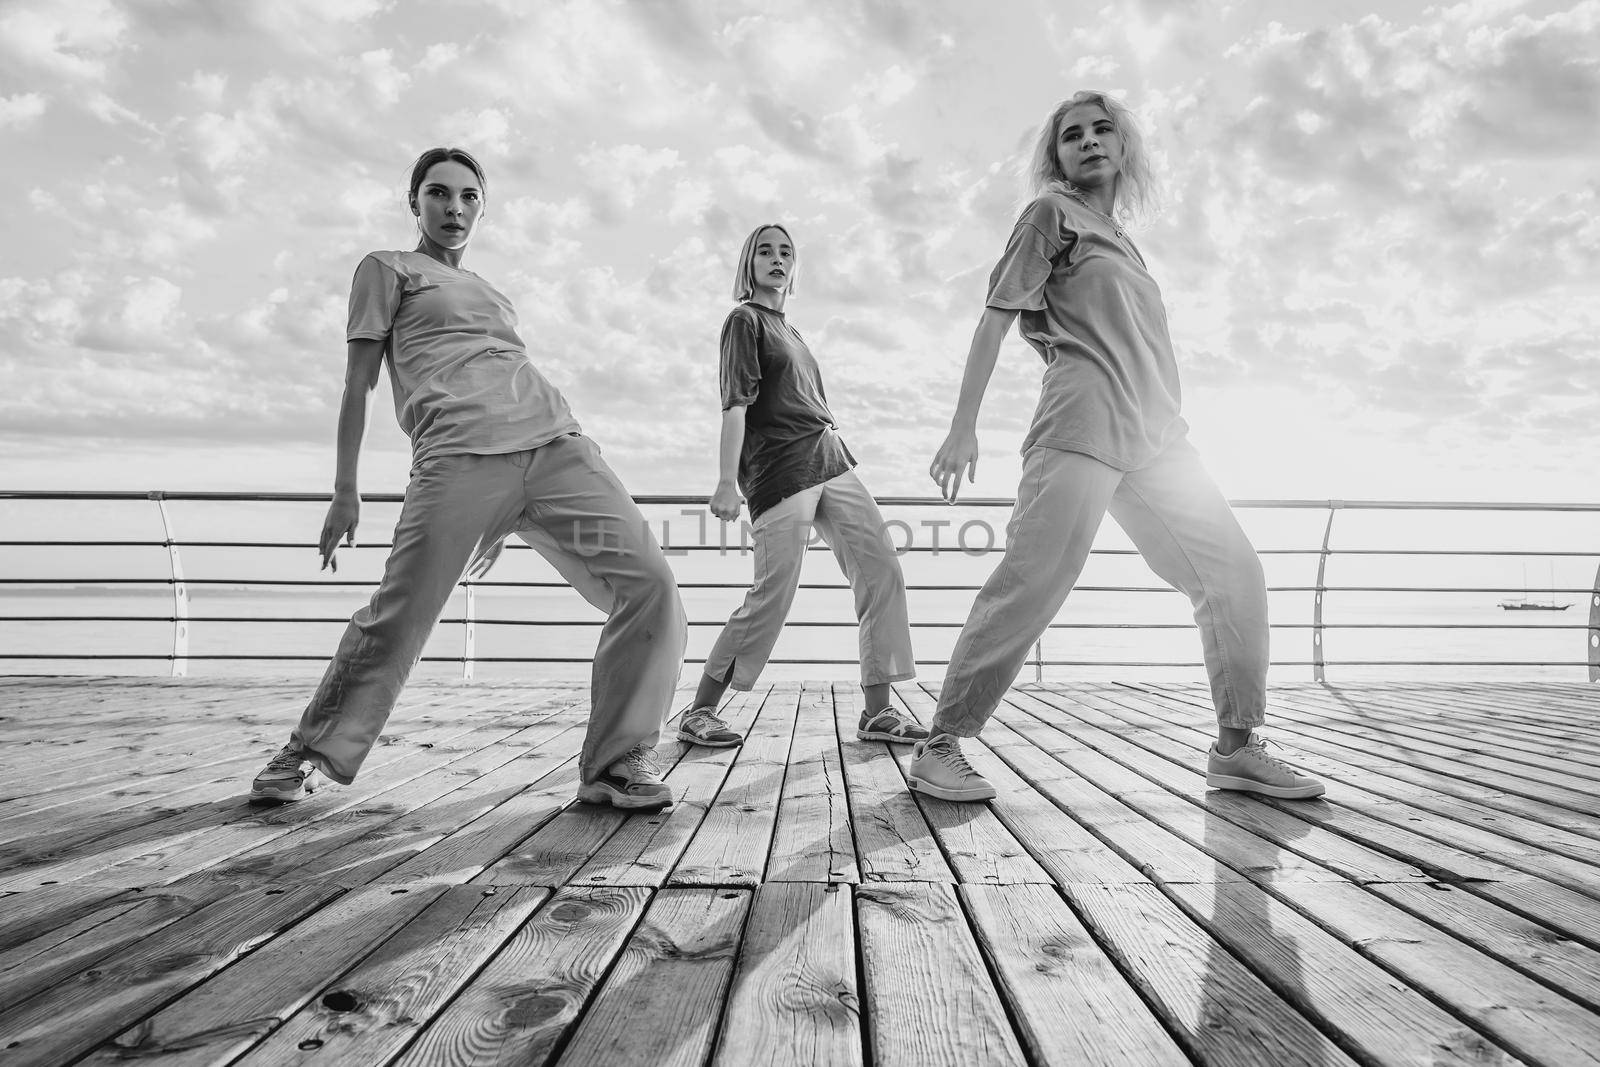 Dancing group of young talented freak women performing freestyle hip-hop moves. females enjoying modern dance expression. Outdoor training near sea or ocean during sunset. by kristina_kokhanova